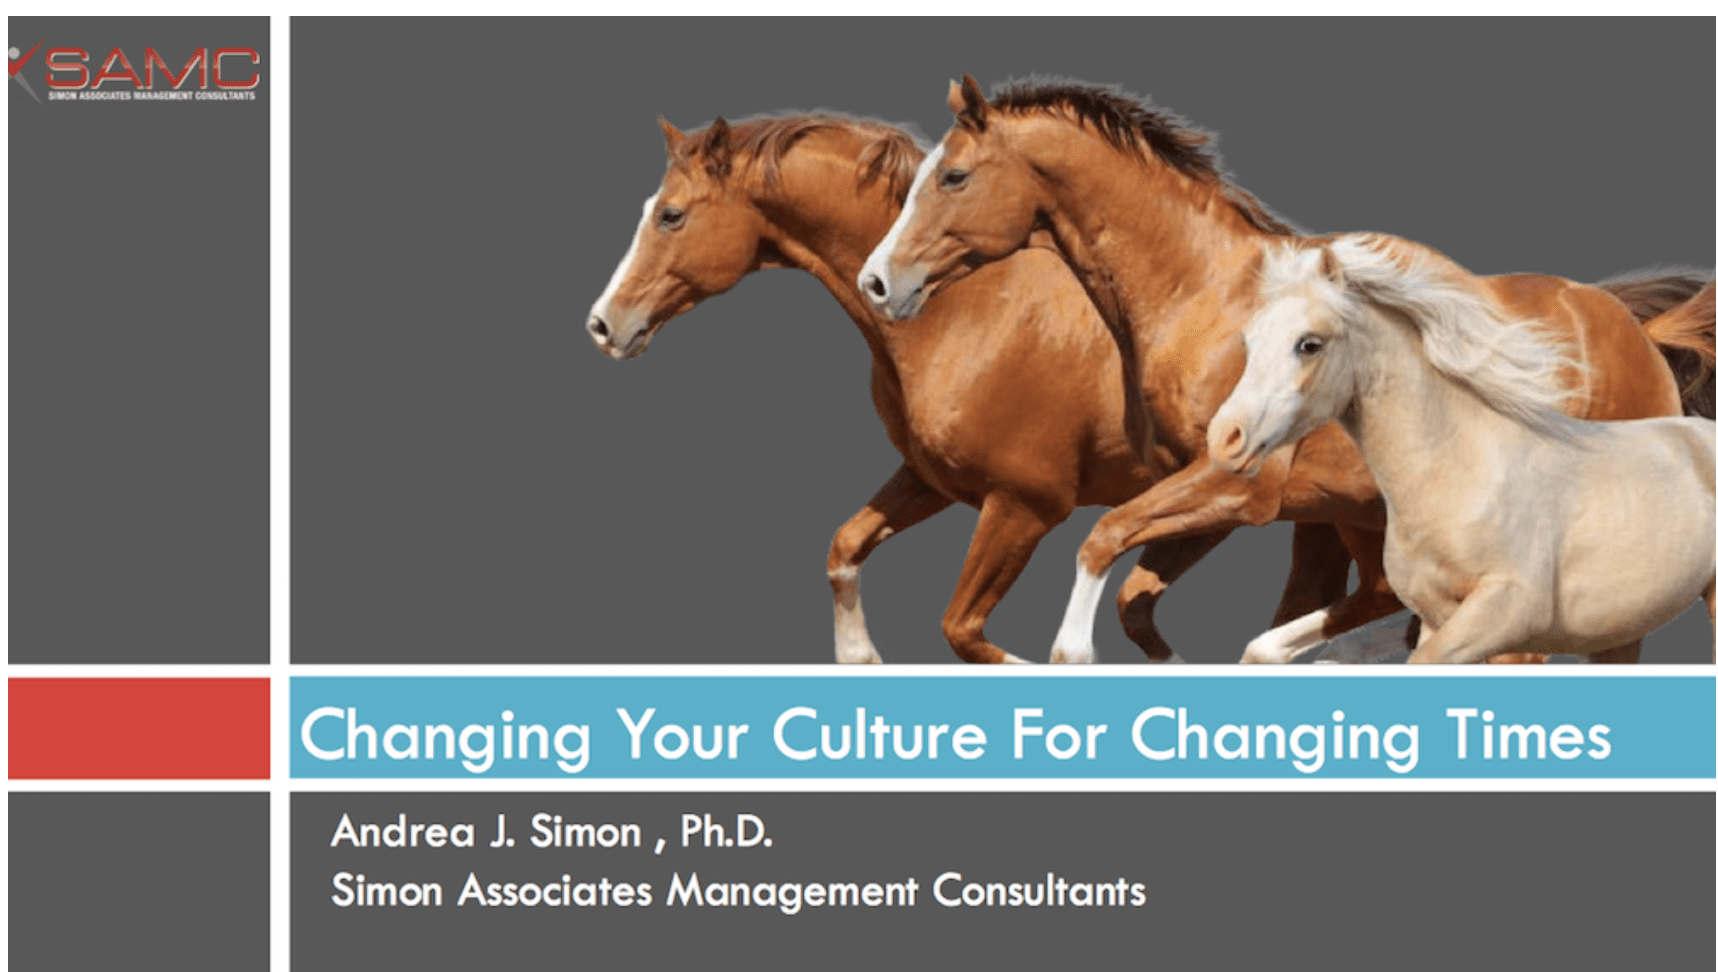 Changing Your Culture for Changing Times